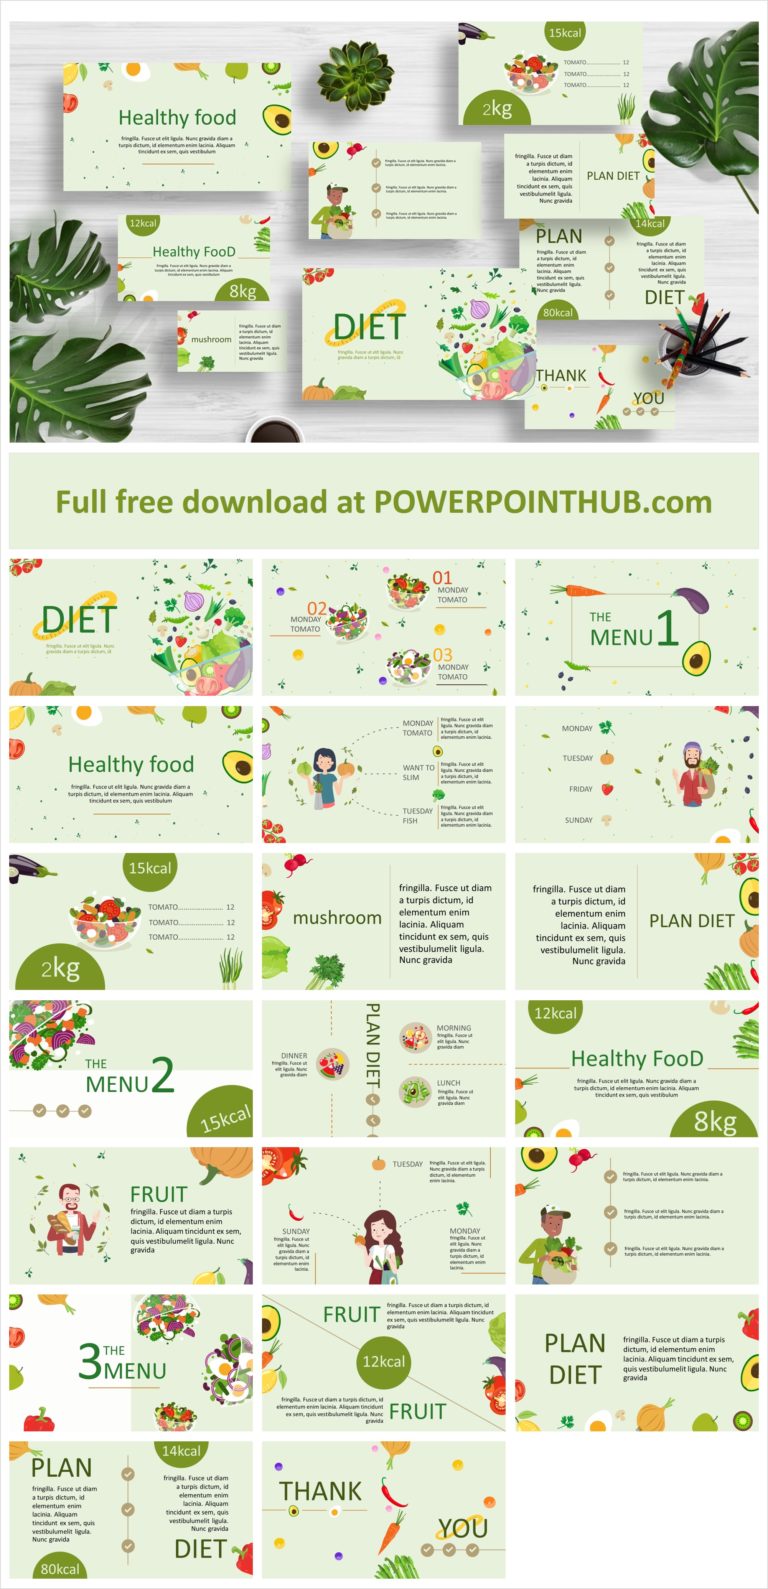 microsoft powerpoint nutrition templates free download 2017